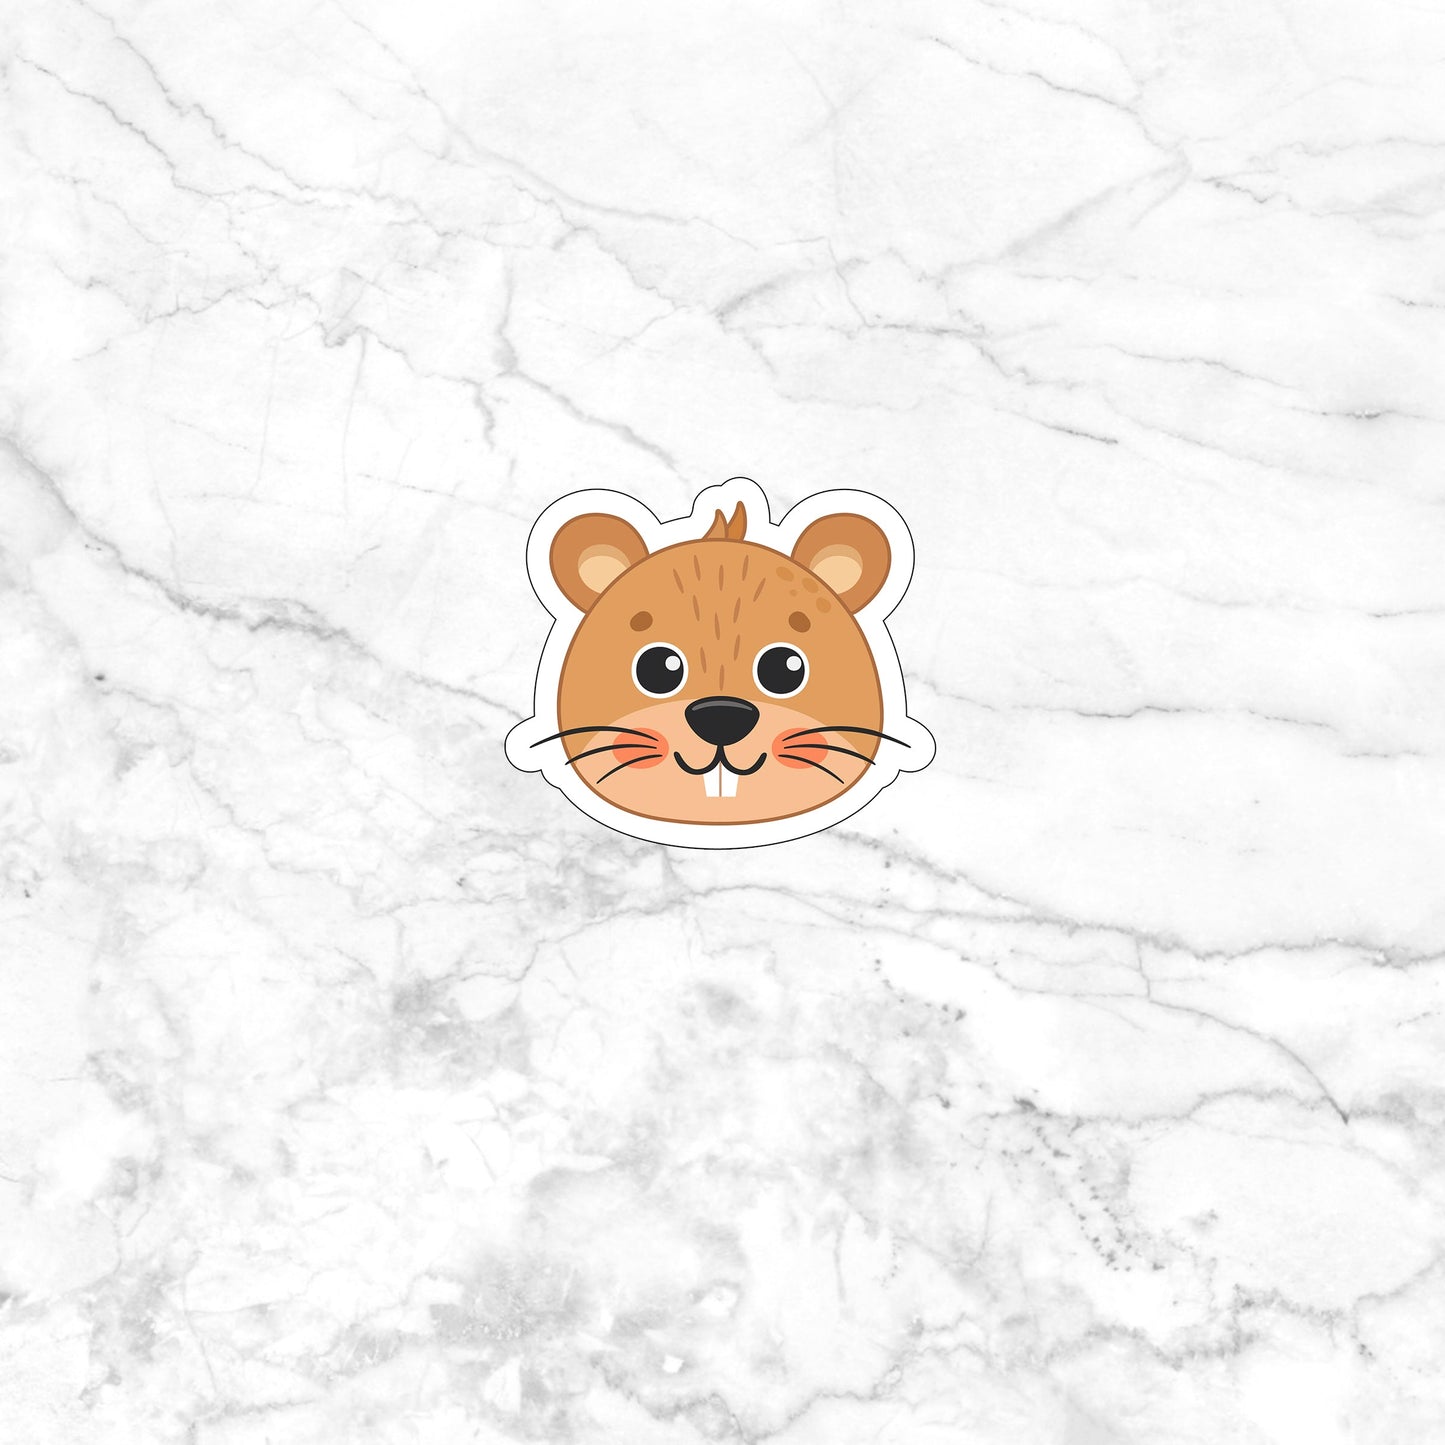 a sticker of a mouse on a marble surface